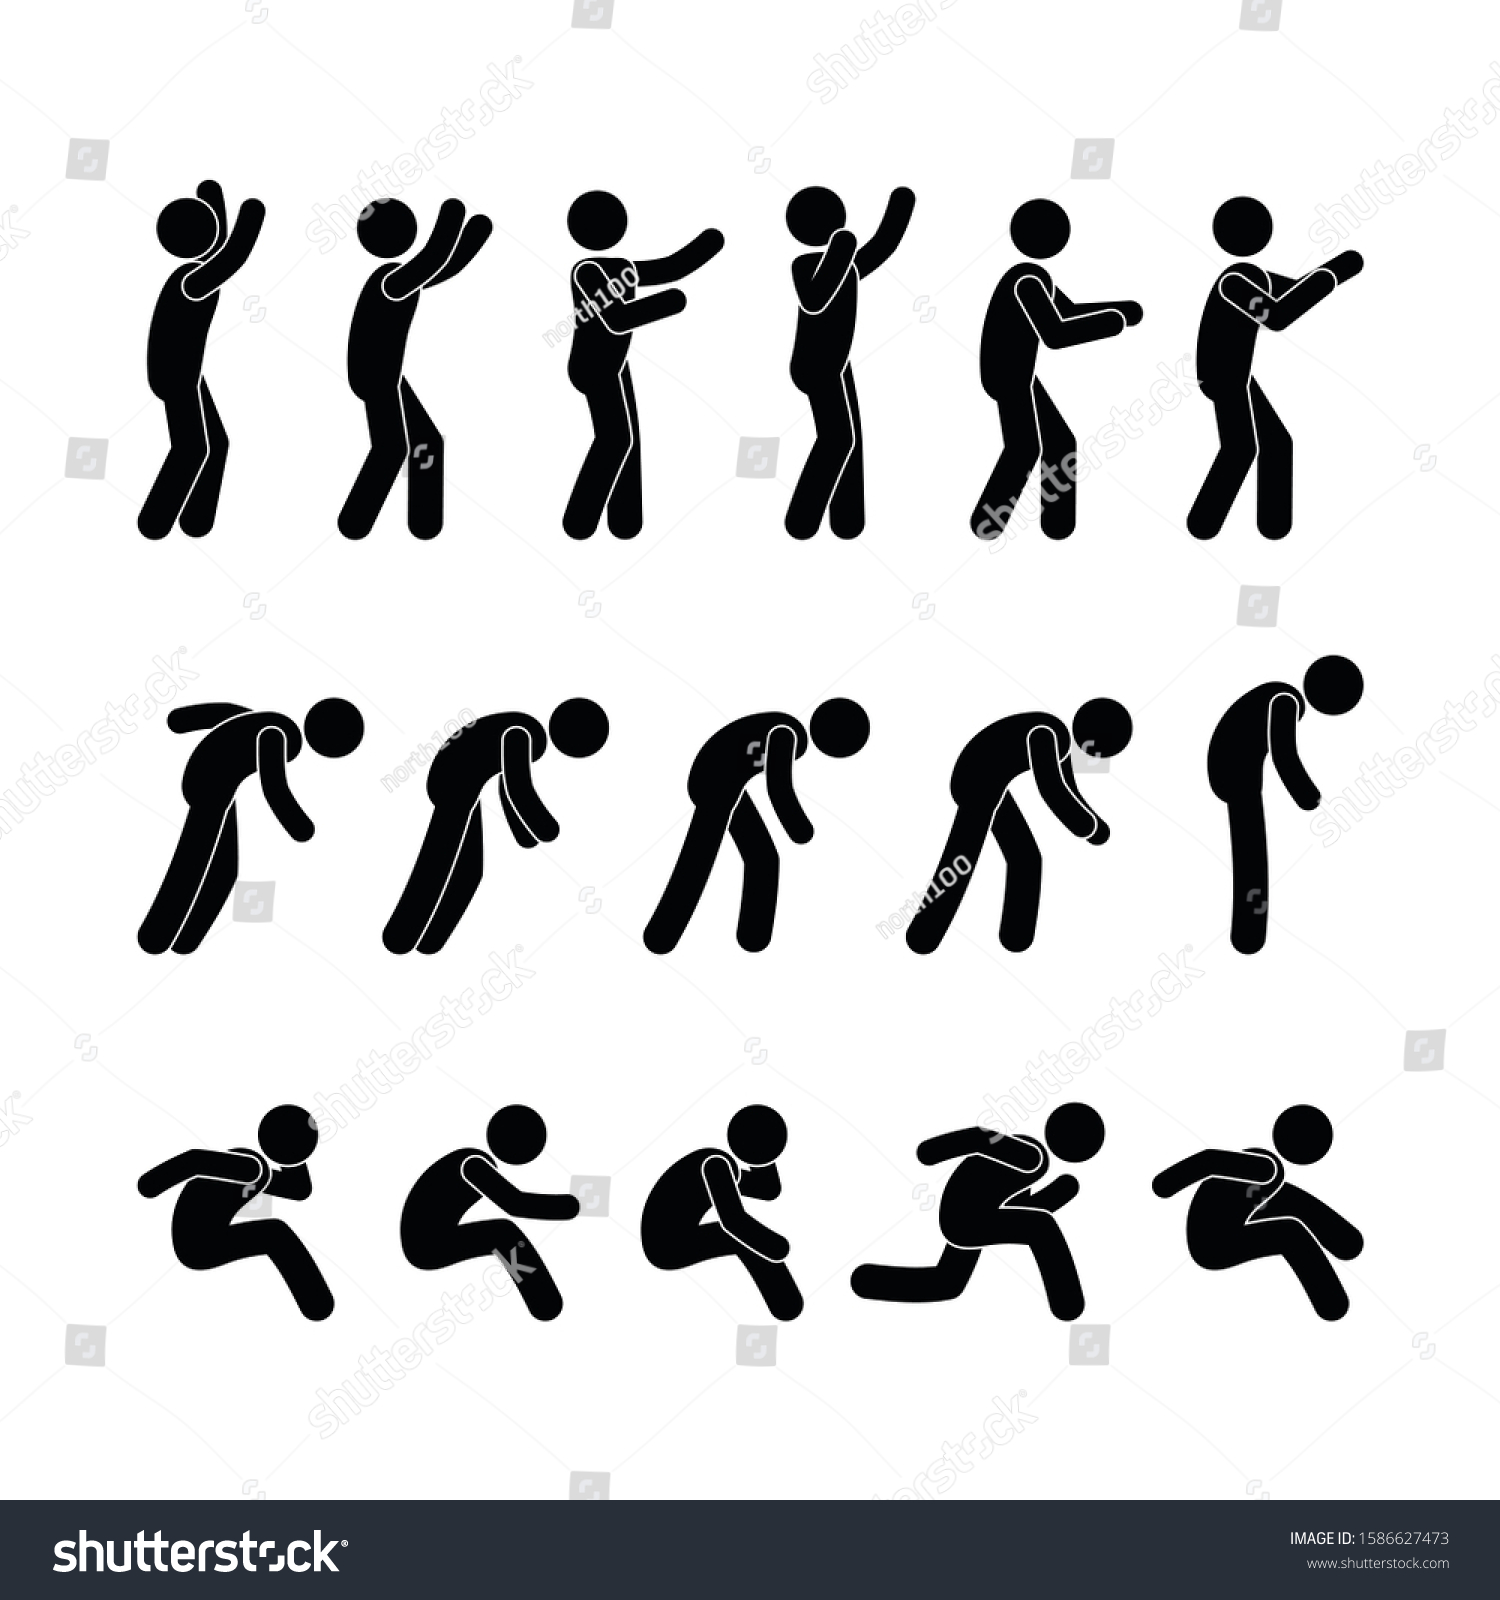 Man Icon Motion Human Silhouettes Pictogram Stock Vector Royalty Free 1586627473 Shutterstock 8993